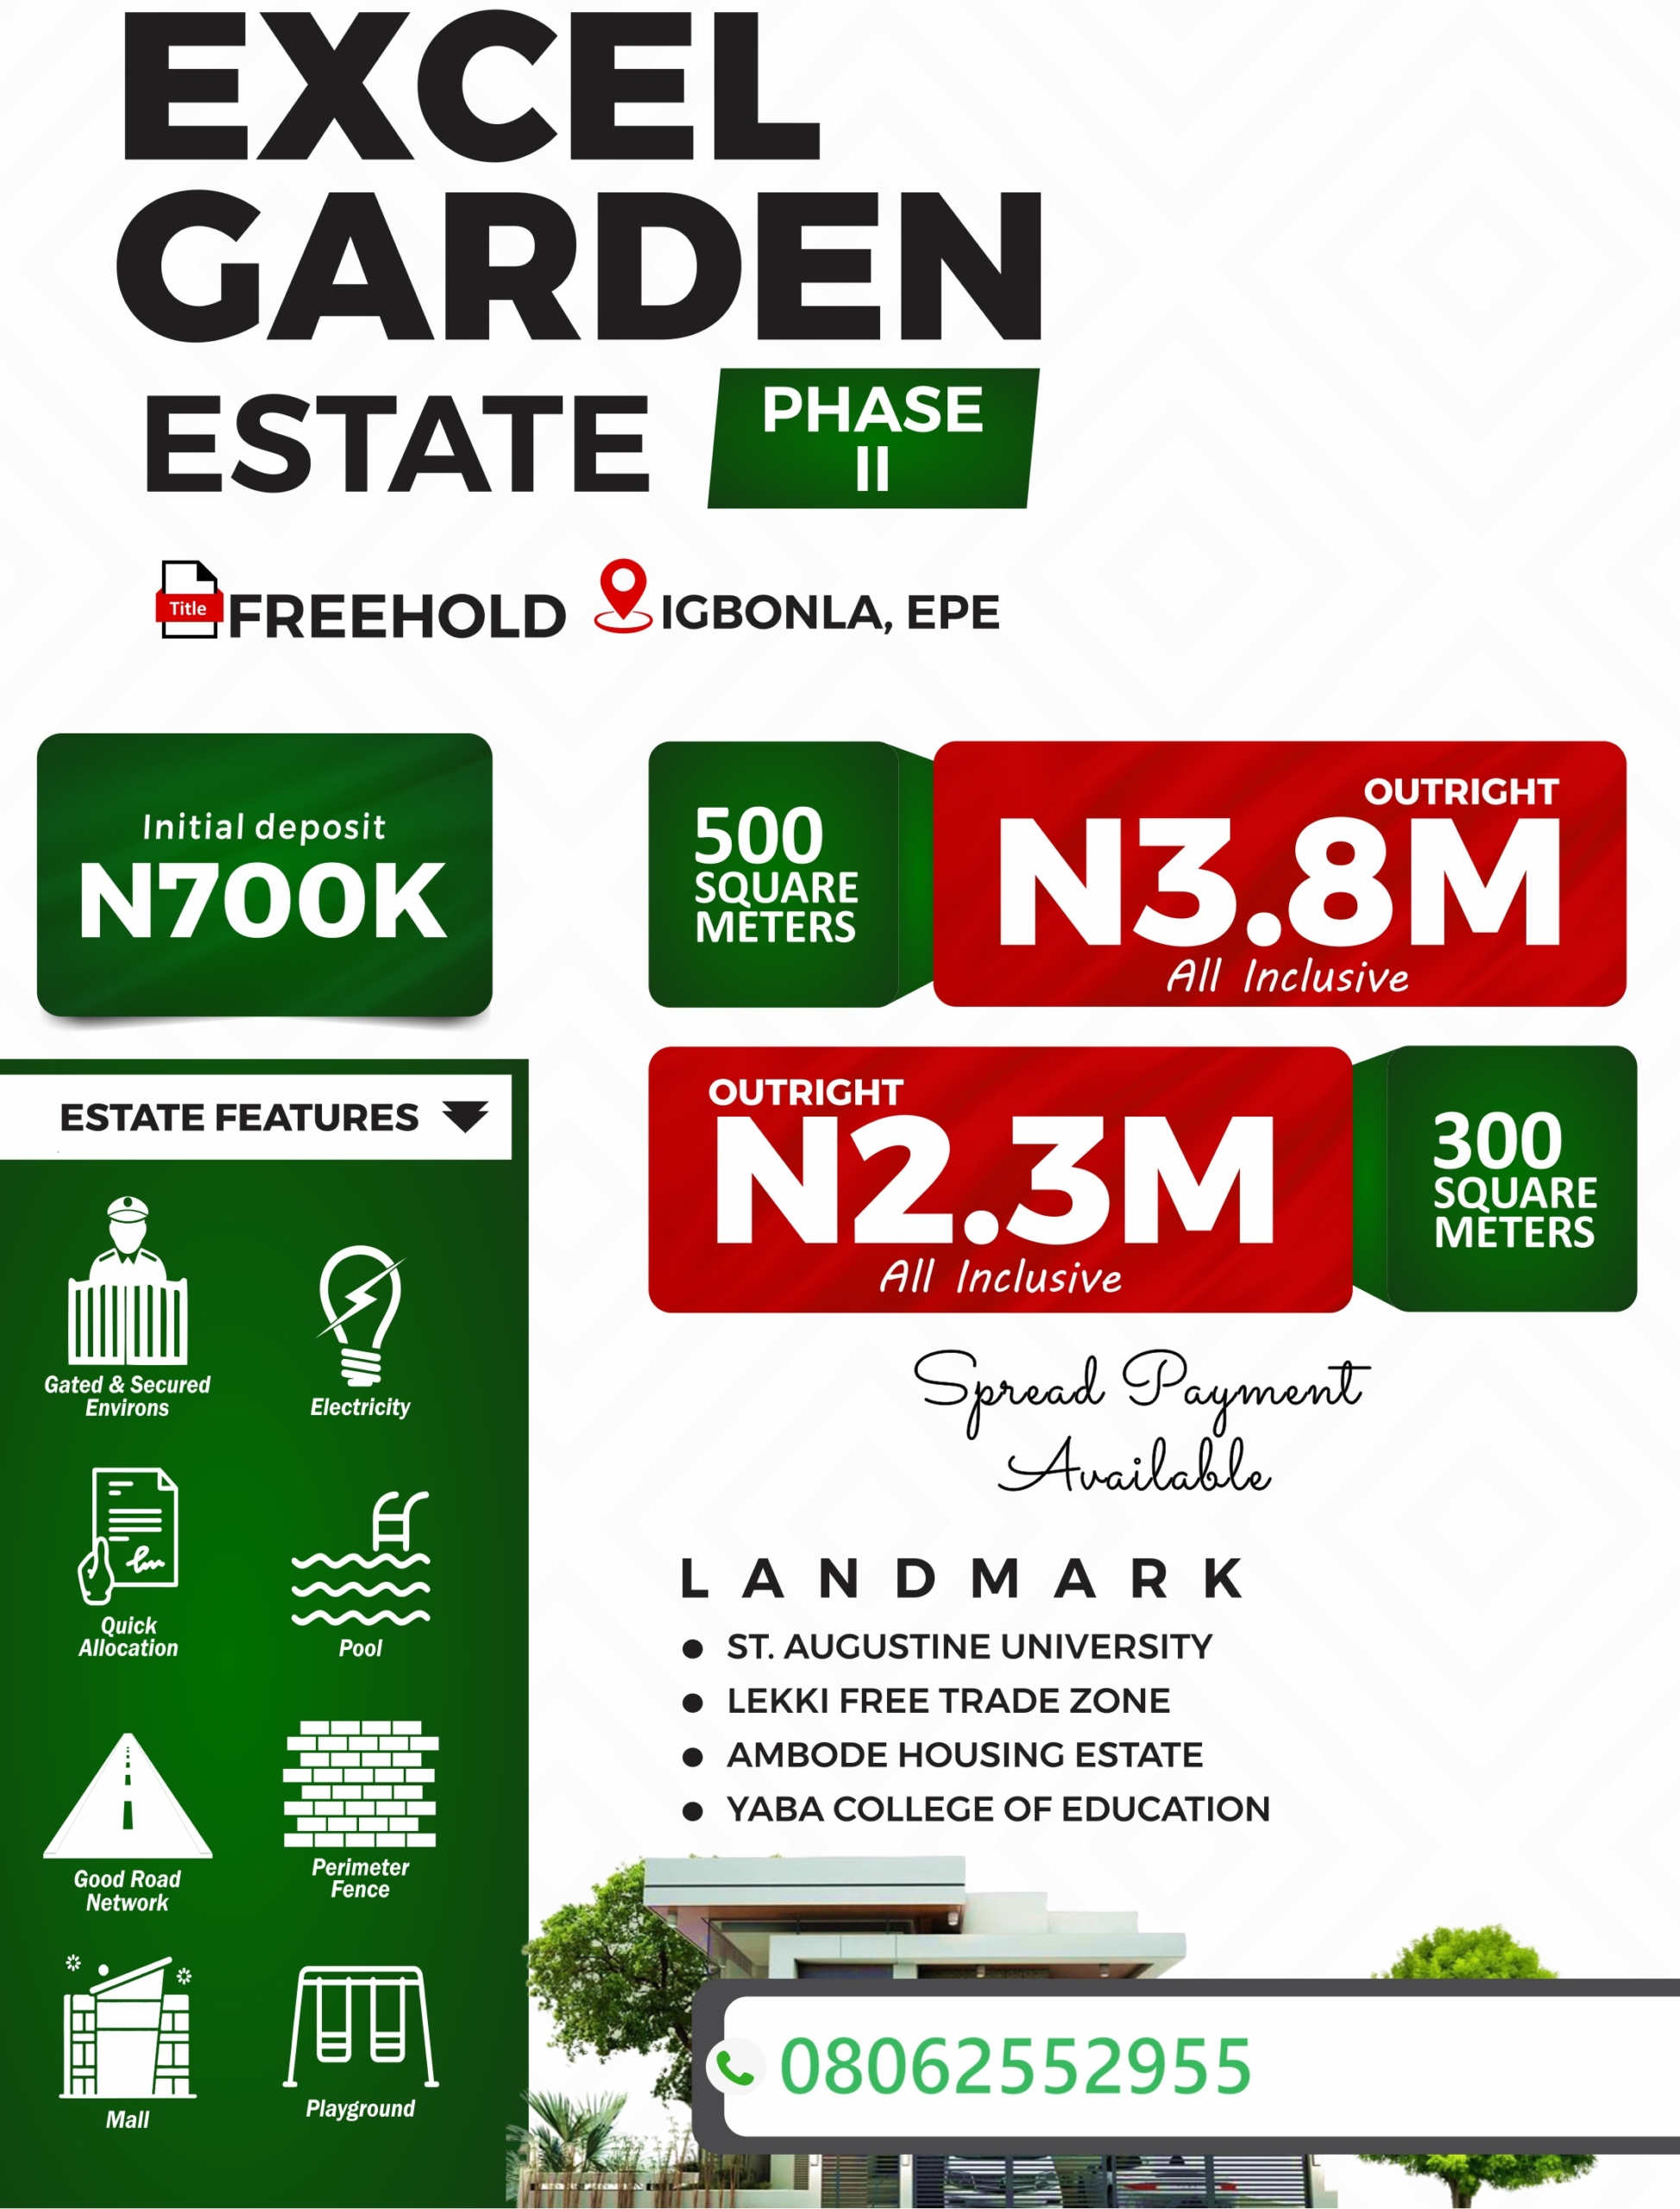 Land for Sale in Igbonla Epe Lagos State